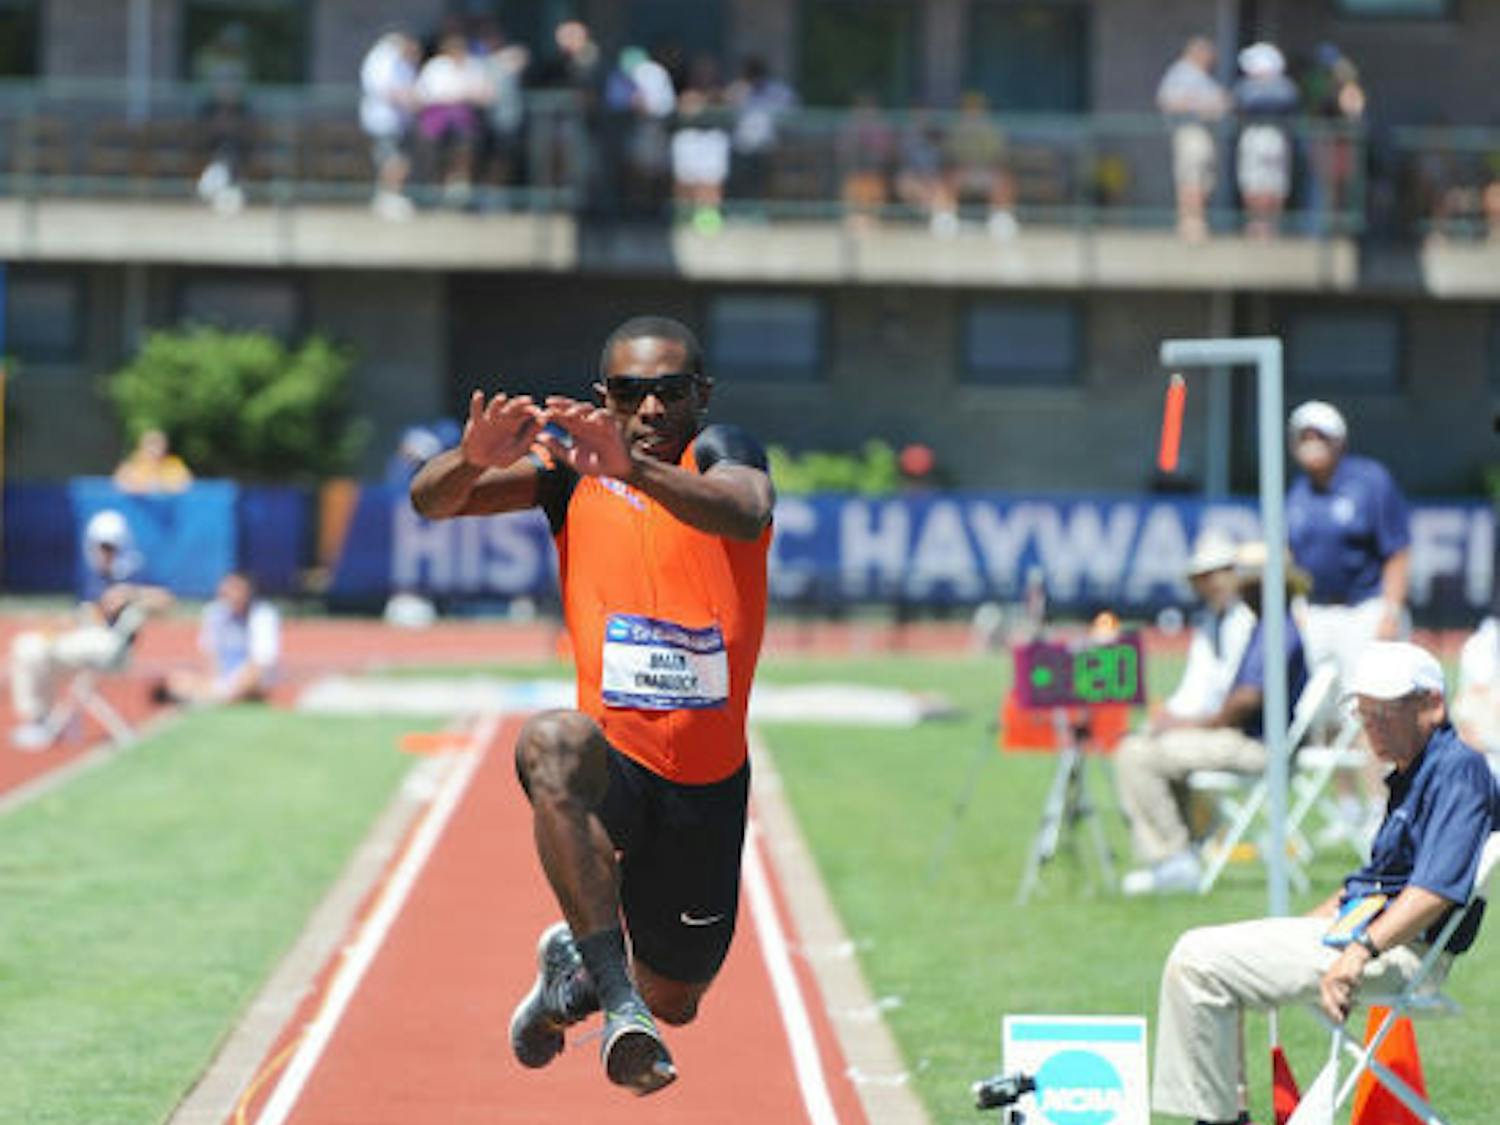 Omar Craddock competes in the triple jump on the final day of the 2013 NCAA Outdoor Track and Field Championships in Eugene, Oregon.